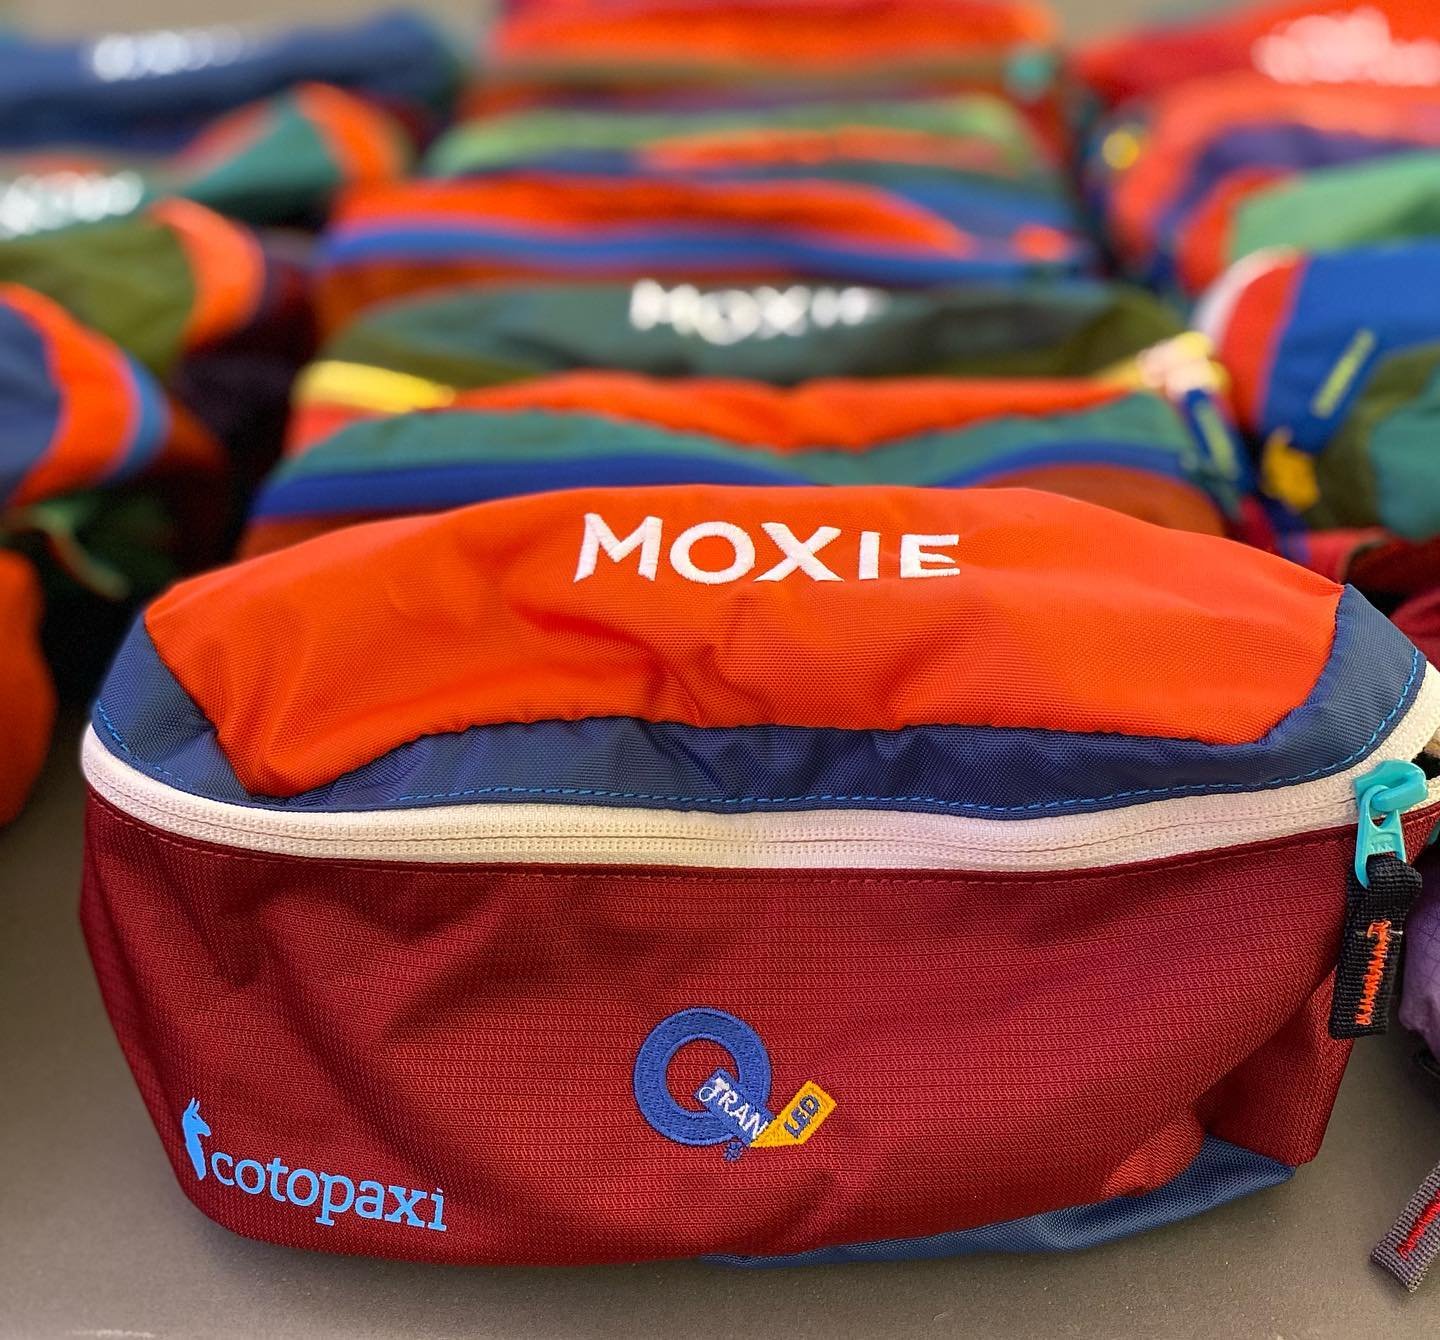 To say we&rsquo;re looking forward to handing out these fannypacks from @cotopaxi is an understatement.  Supplies limited, don&rsquo;t be left wishing you had come by sooner 😉 @qtraninc making dreams into reality
#leducation